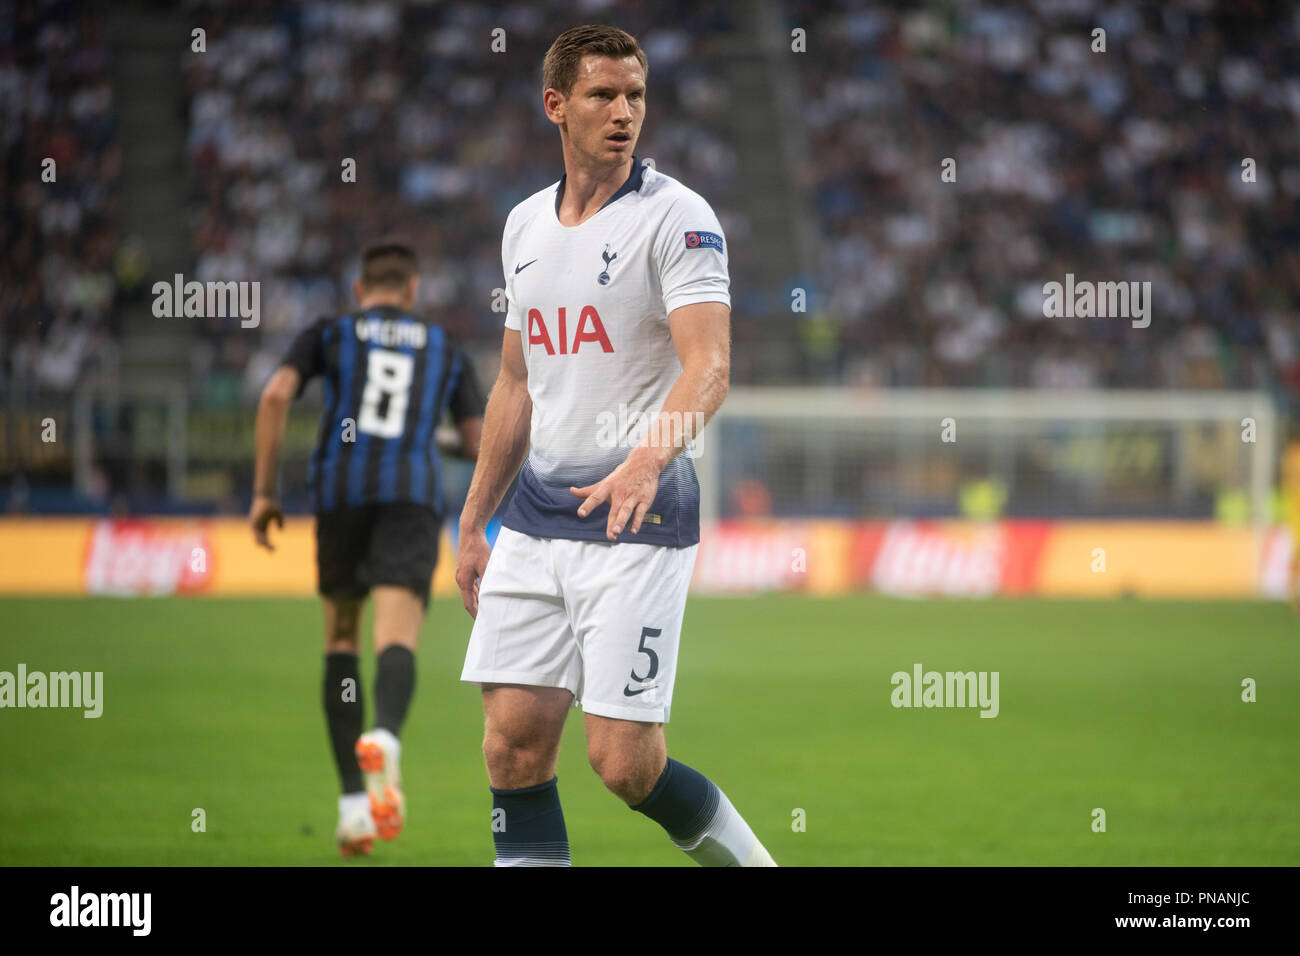 Jan Vertonghen (Tottenham Hotspur)during the UEFA Champions League Group Stage match between Inter Milan and Tottenham Hotspur at Stadio San Siro. The Stock Photo